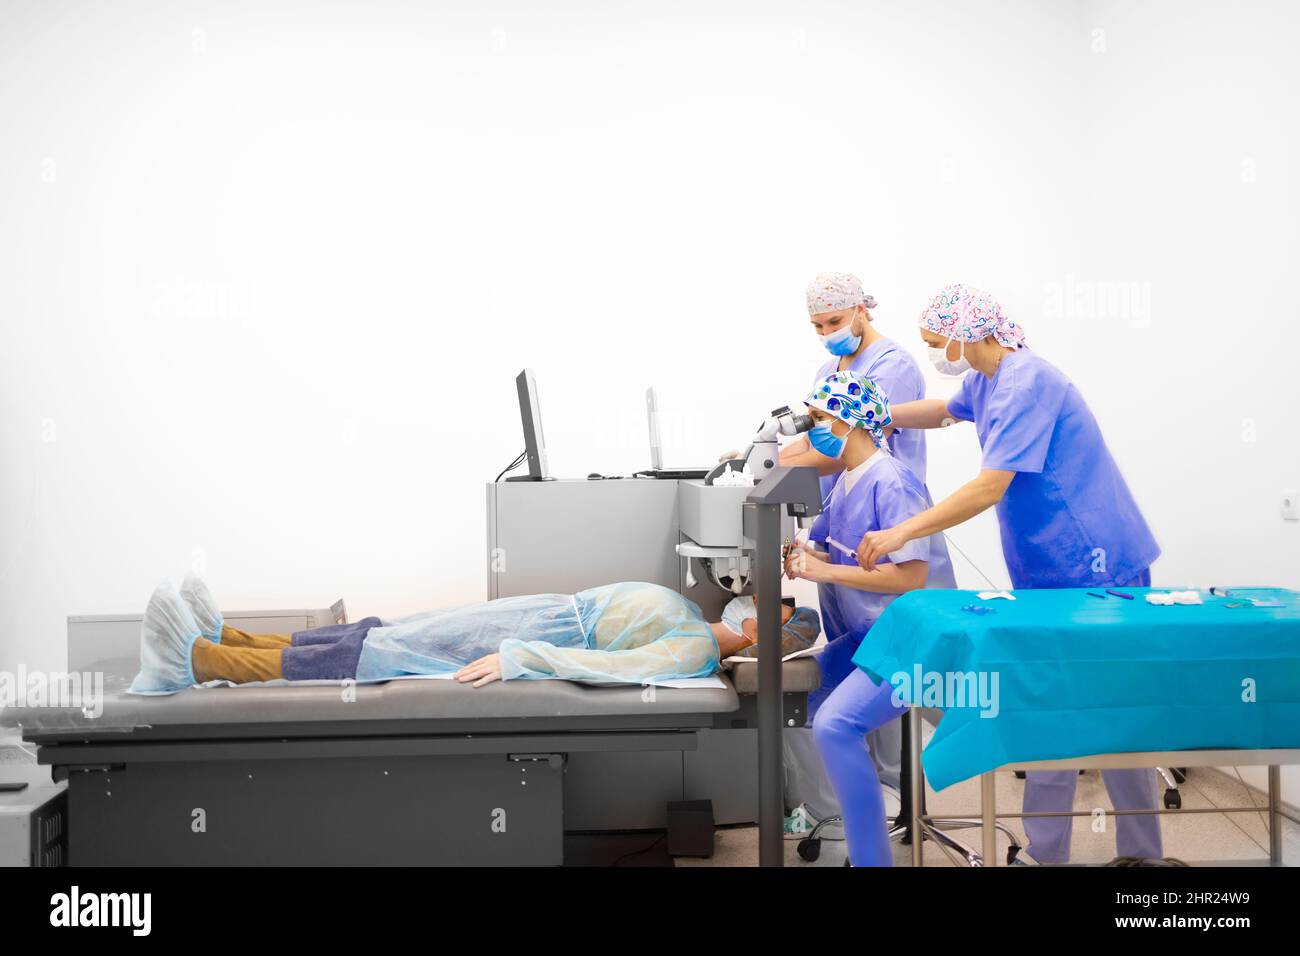 A team of doctors working together to help a patient Stock Photo